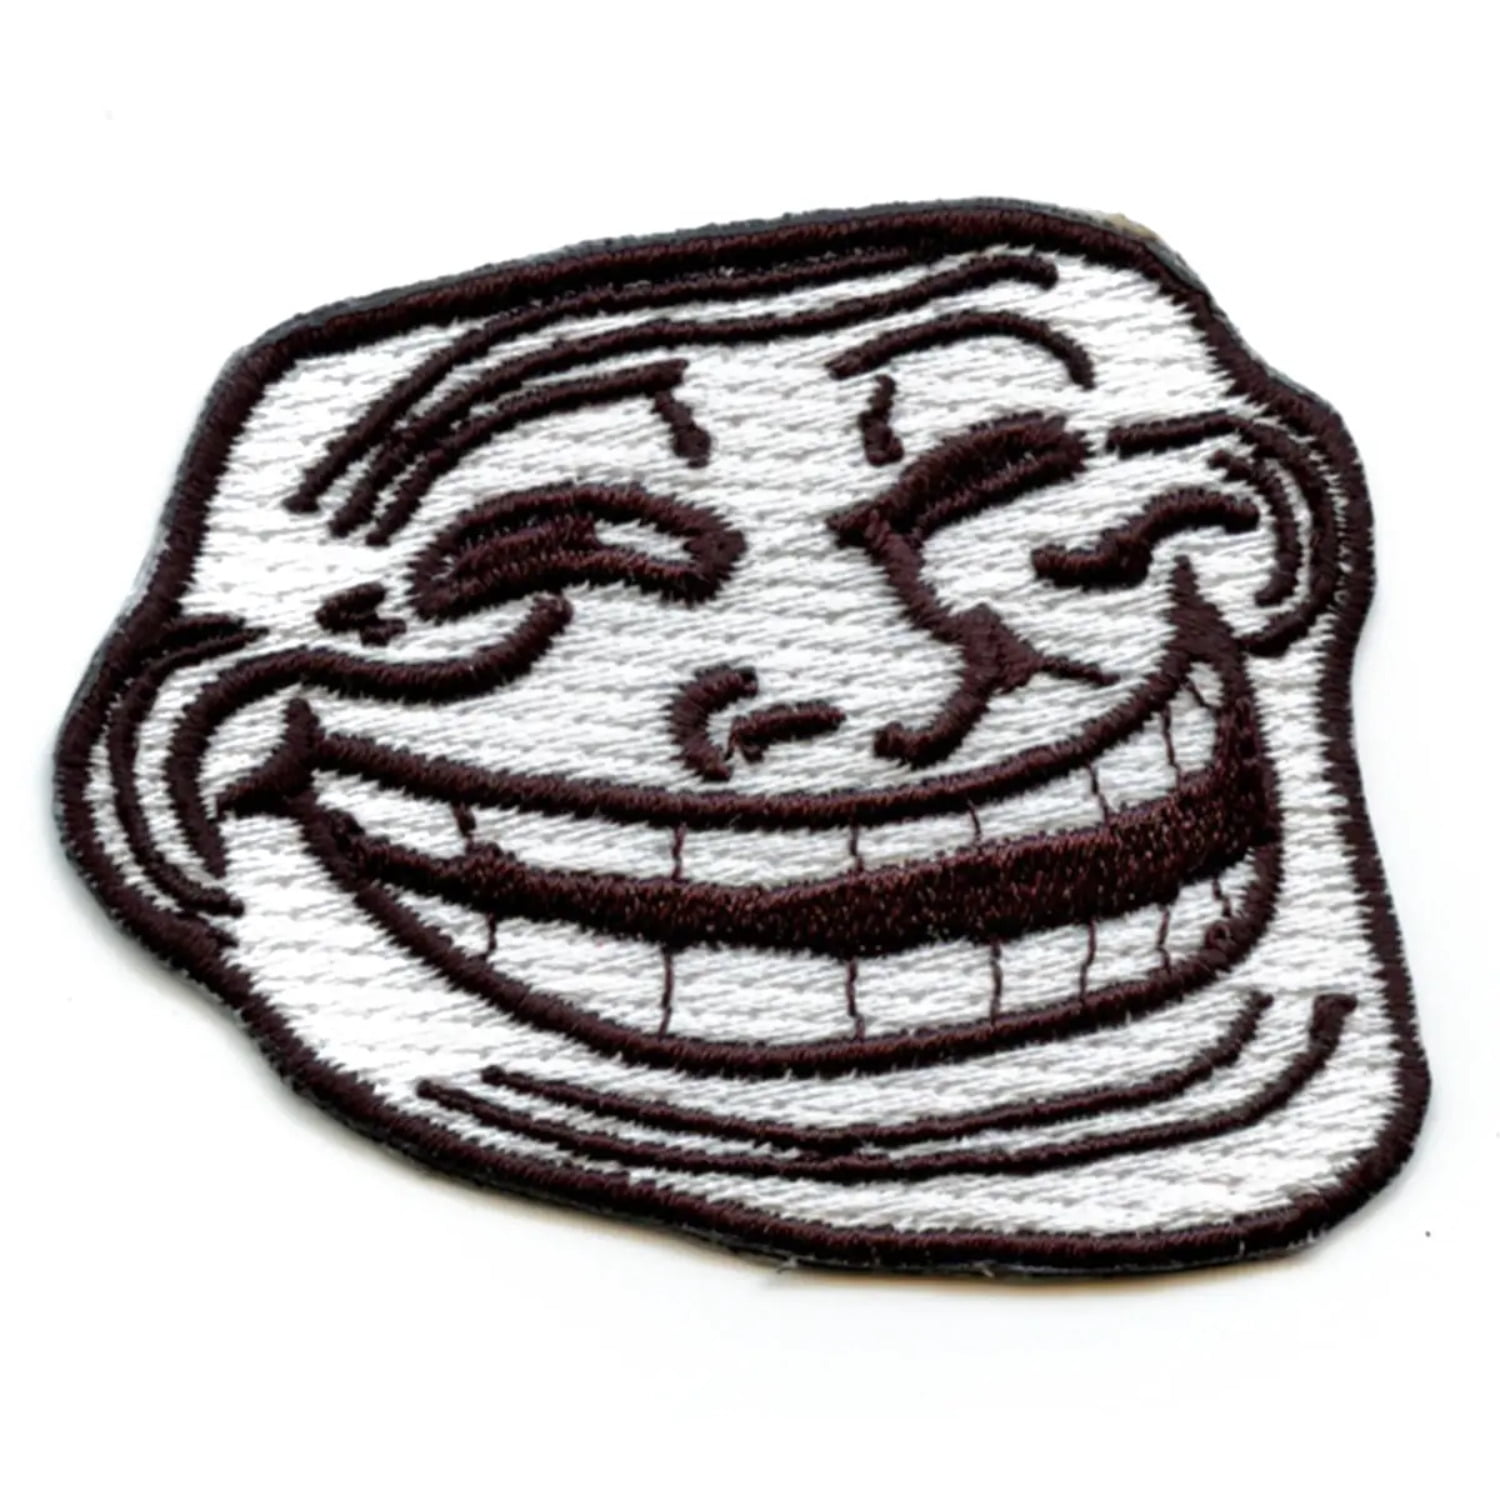 Iron-on Patch Trollface Meme Troll Face Patches Funny 